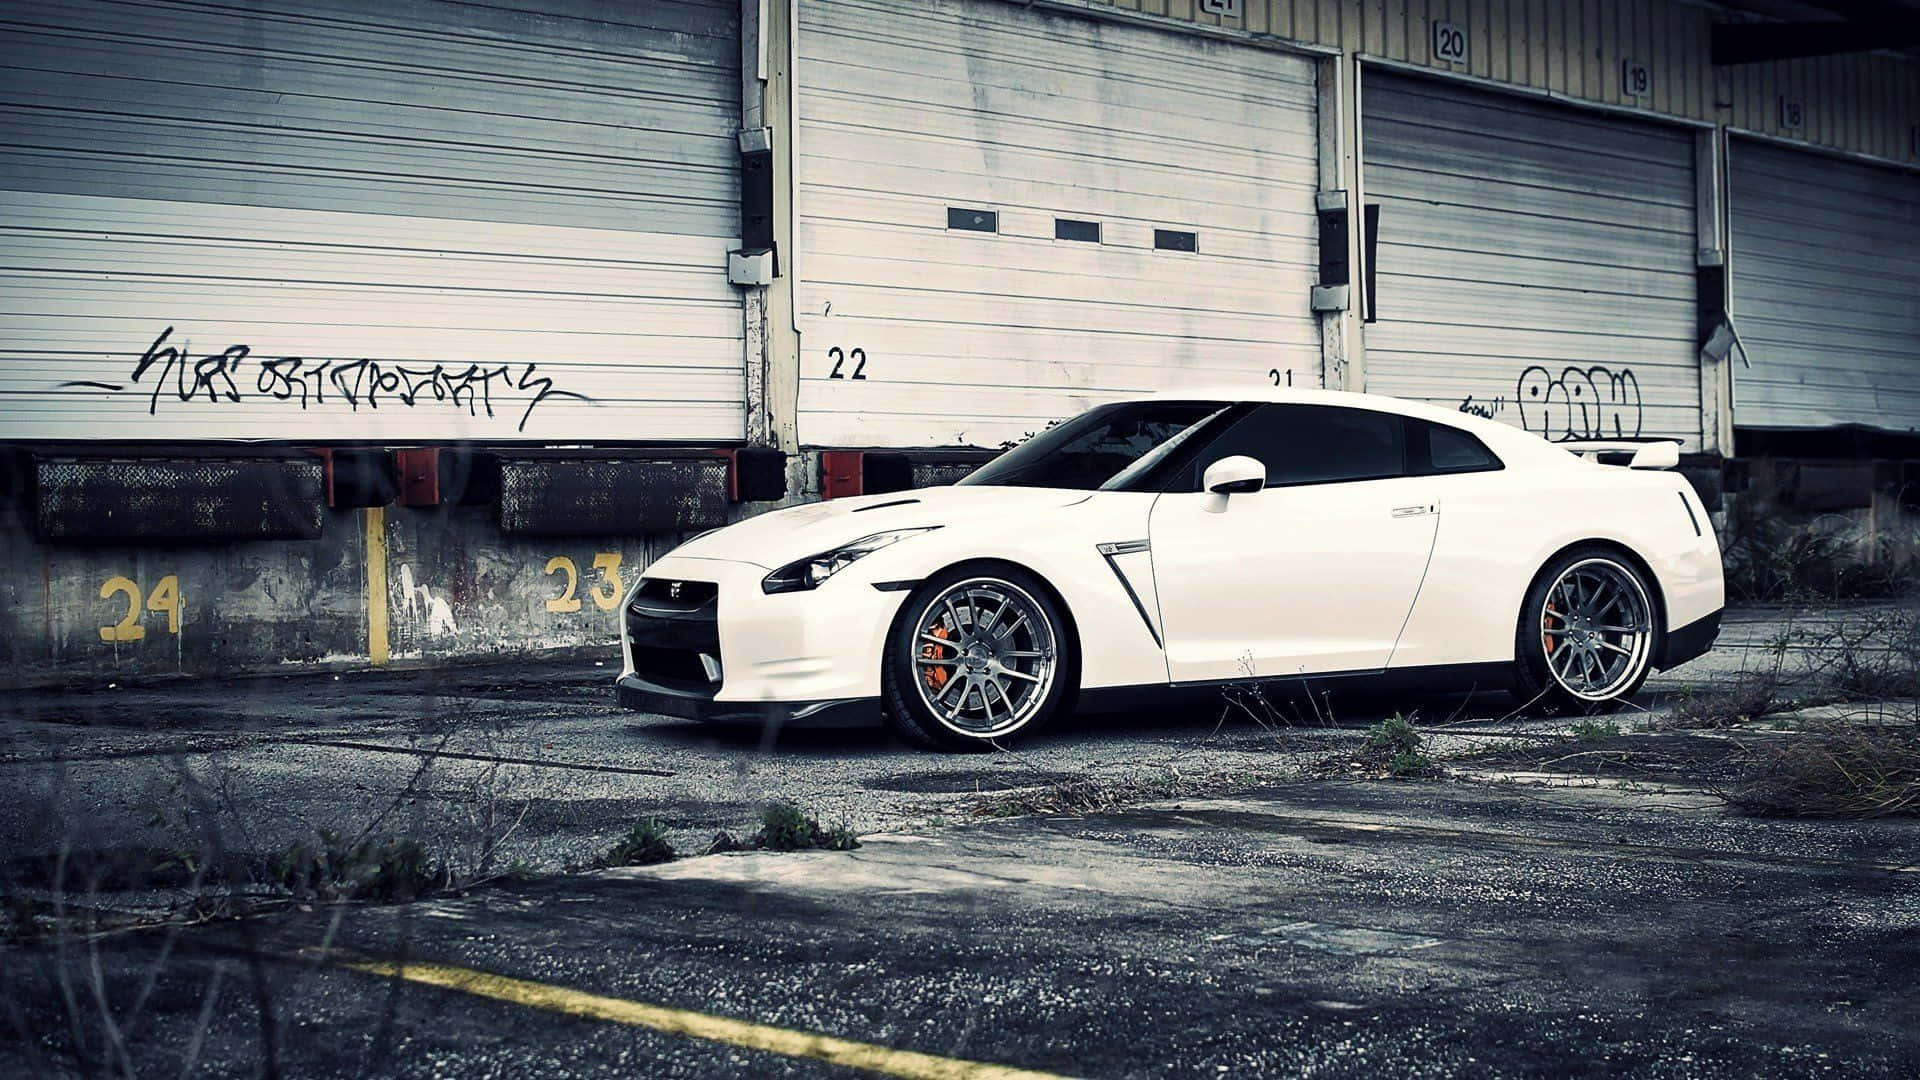 A White Nissan Gtr Parked In Front Of A Garage Wallpaper